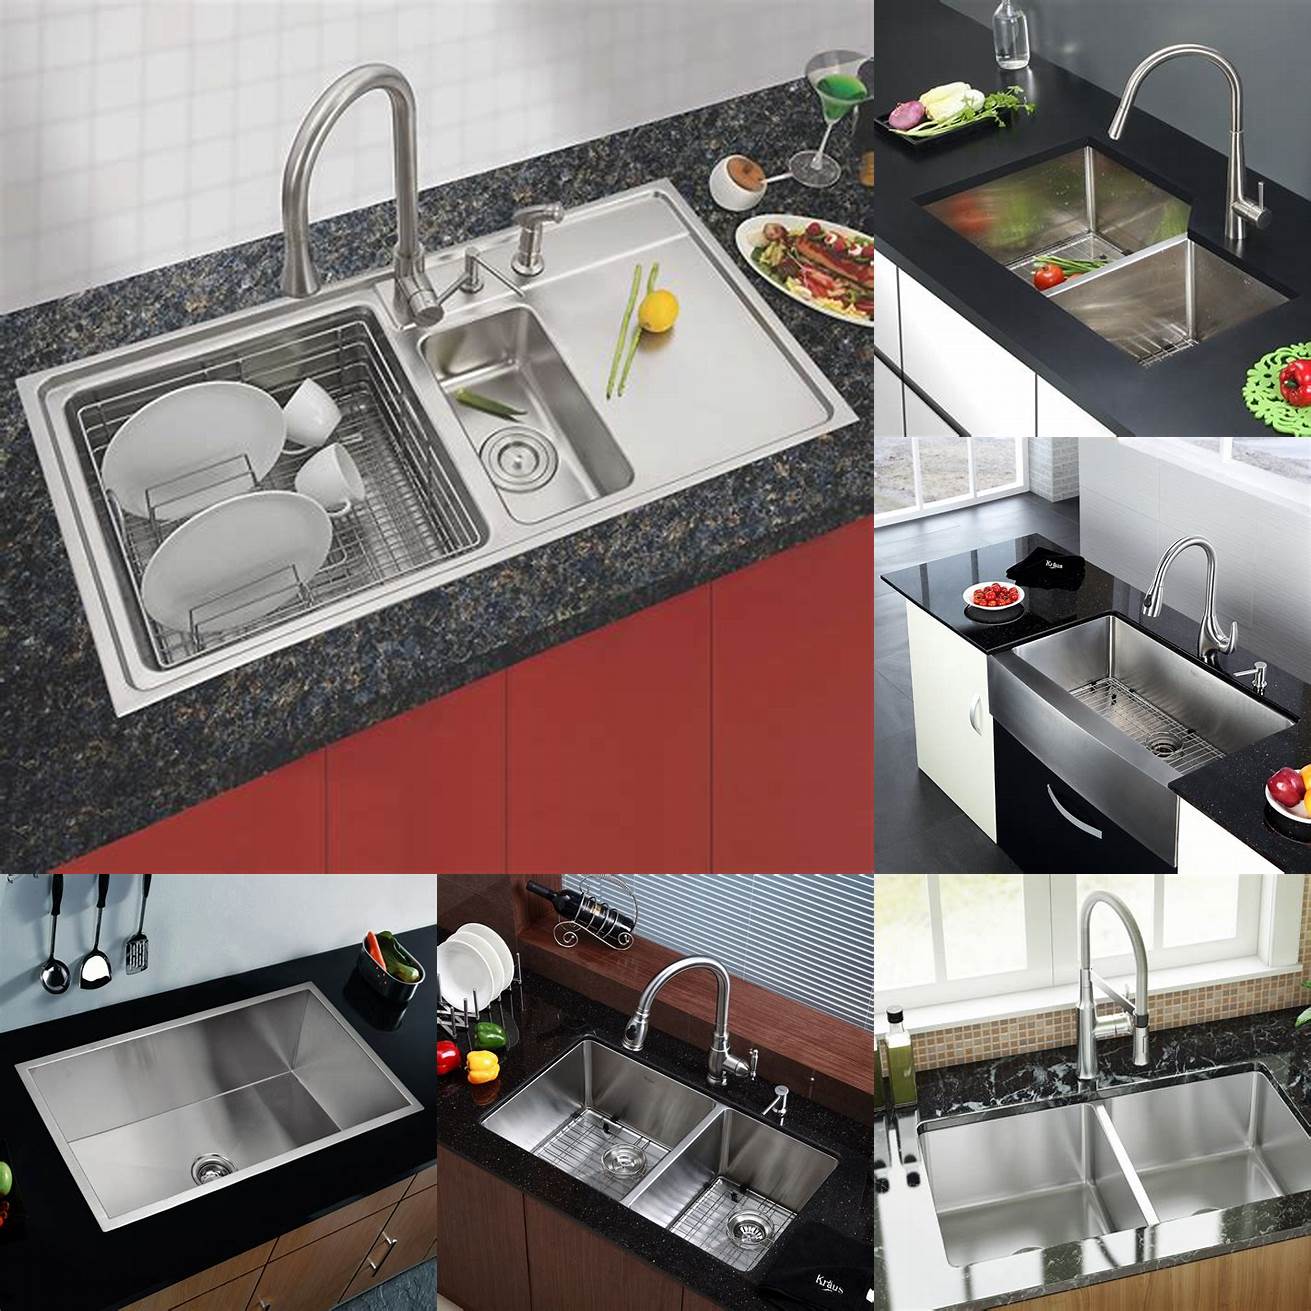 Flexible Stainless steel sinks come in a wide range of sizes shapes and styles to fit any kitchens design and functionality needs You can choose from single or double bowl sinks undermount or top mount sinks and more